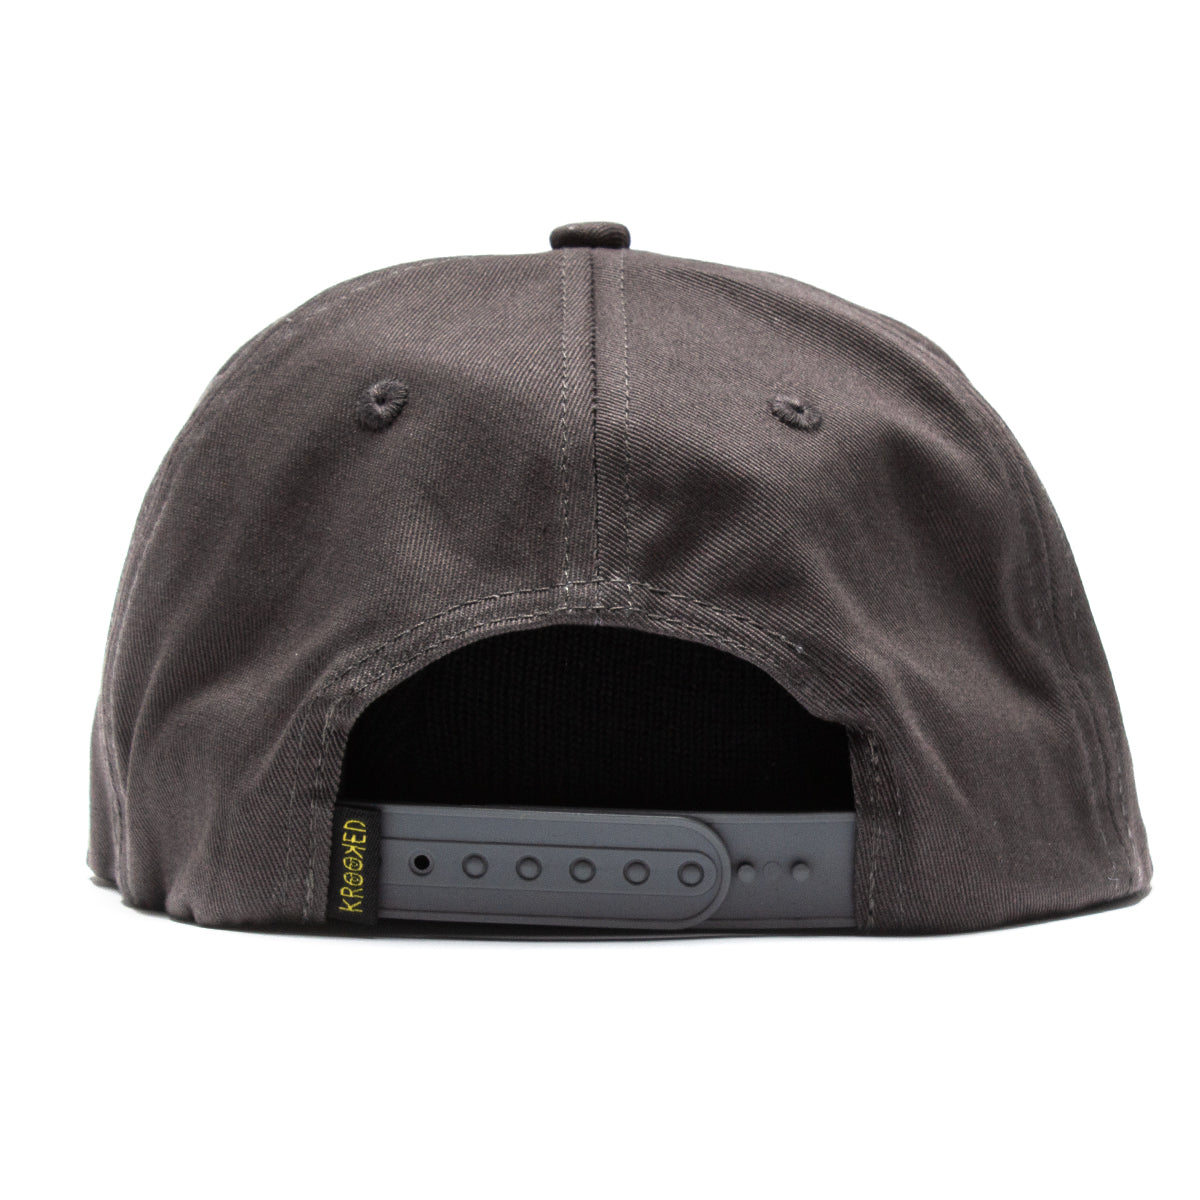 Krooked | Moonsmile Hat Style # 50023123C00 Color : Charcoal